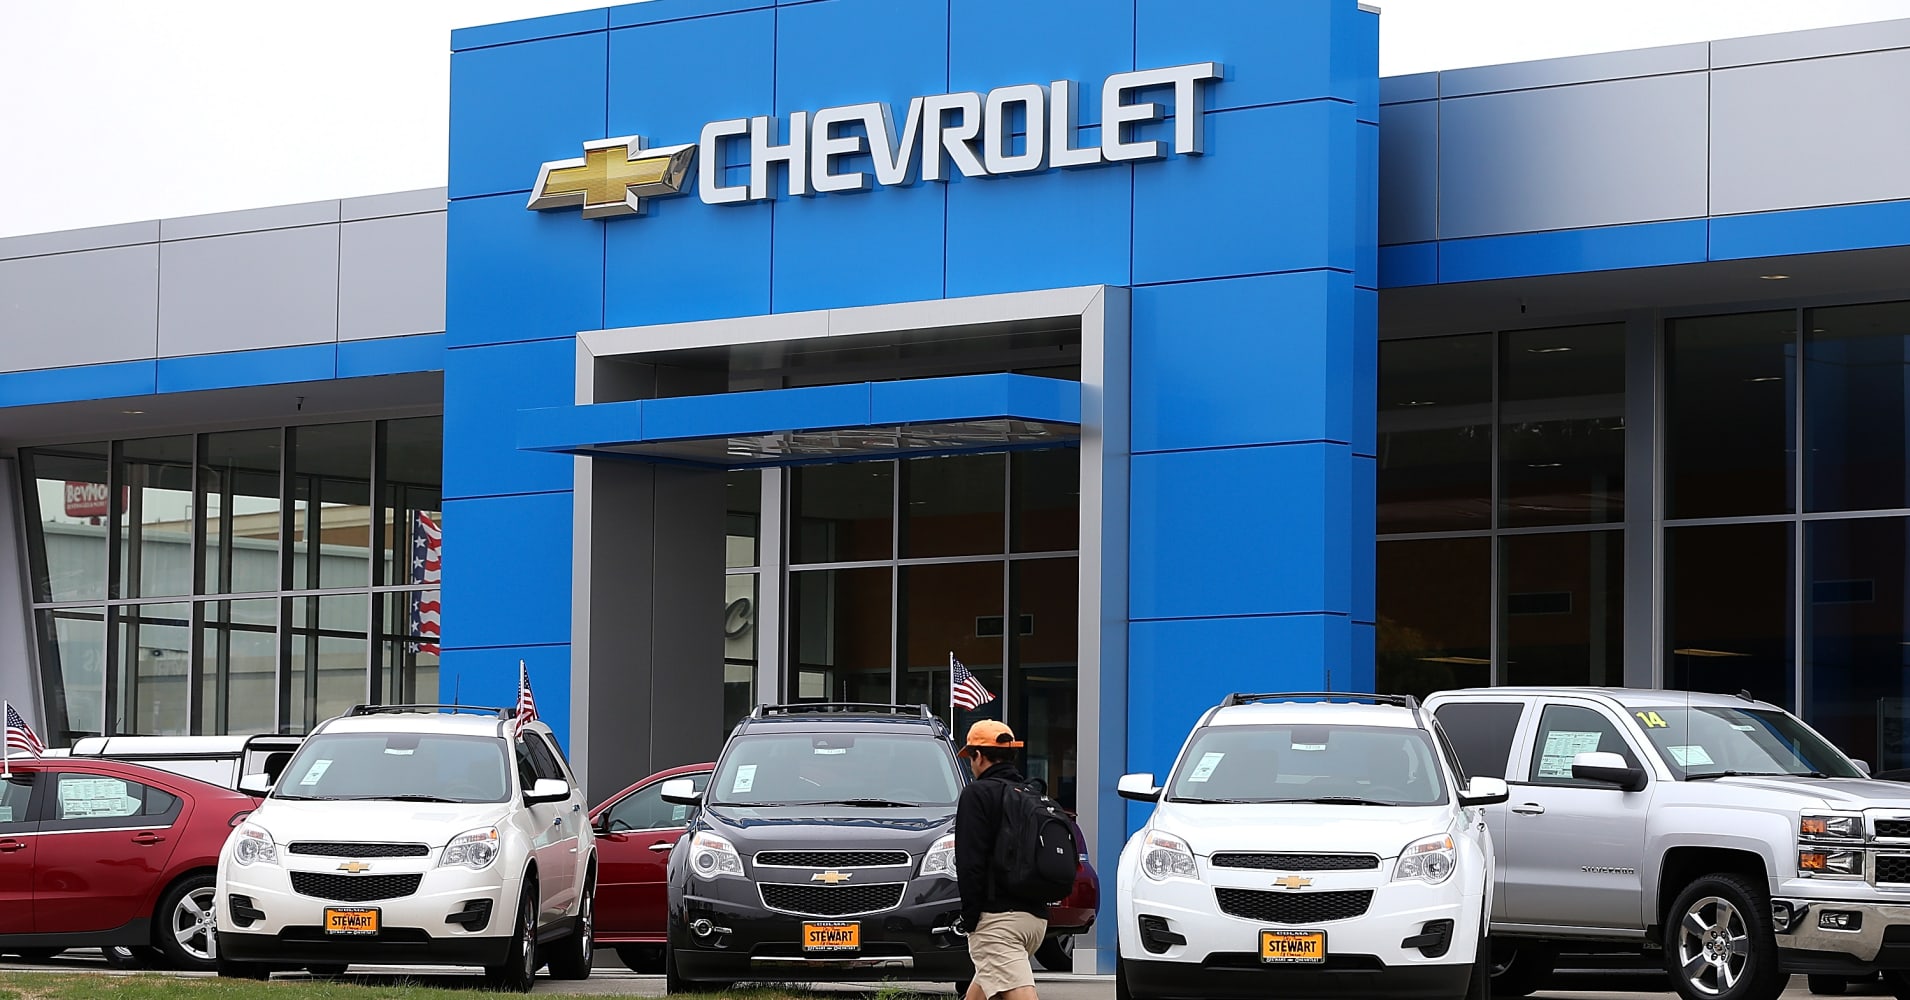 Chevy dealerships: The face of the recall